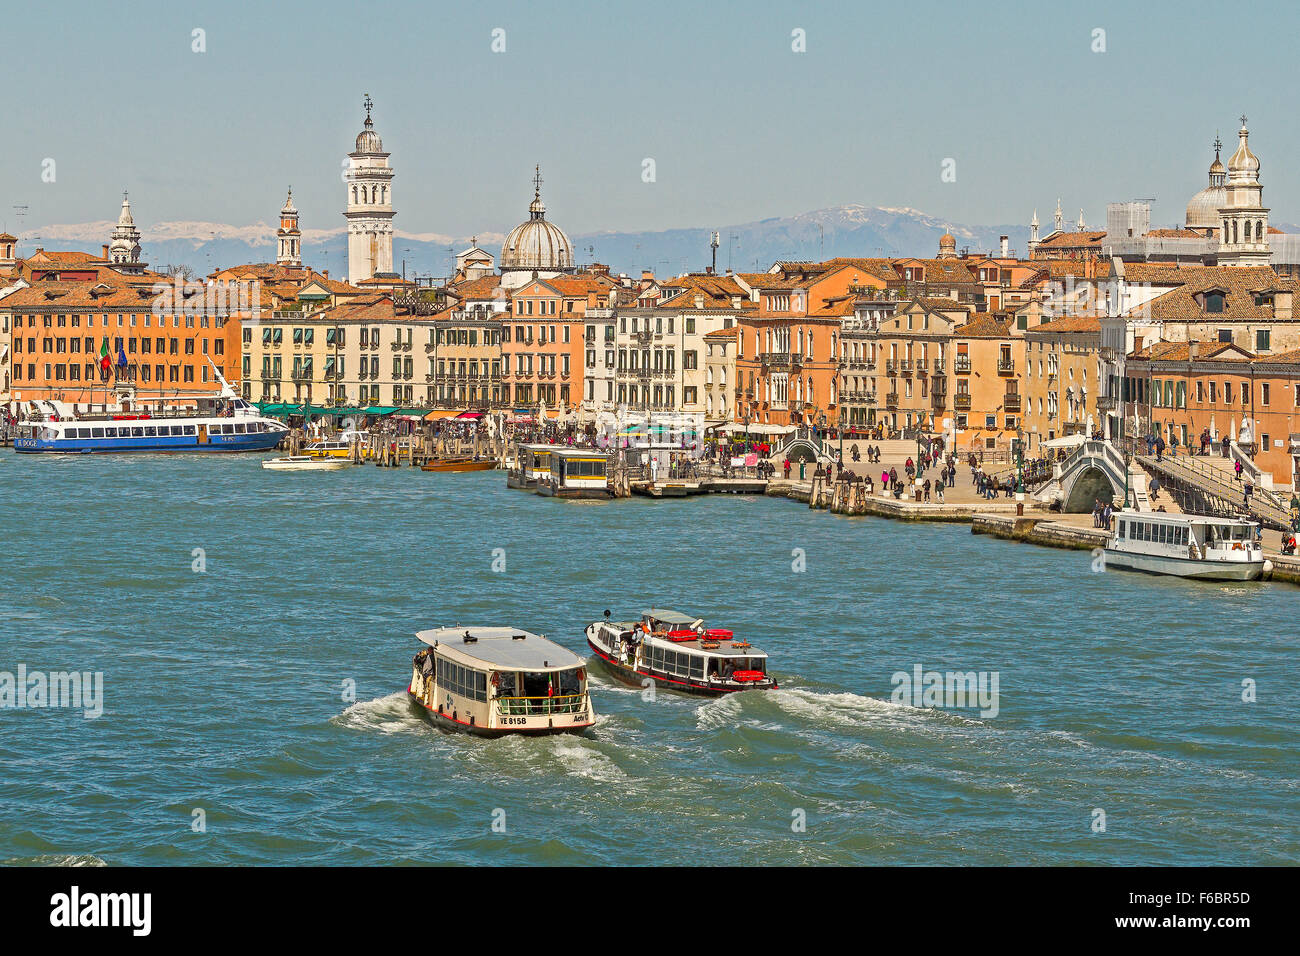 View Of The City From The Lagoon Venice Italy Stock Photo